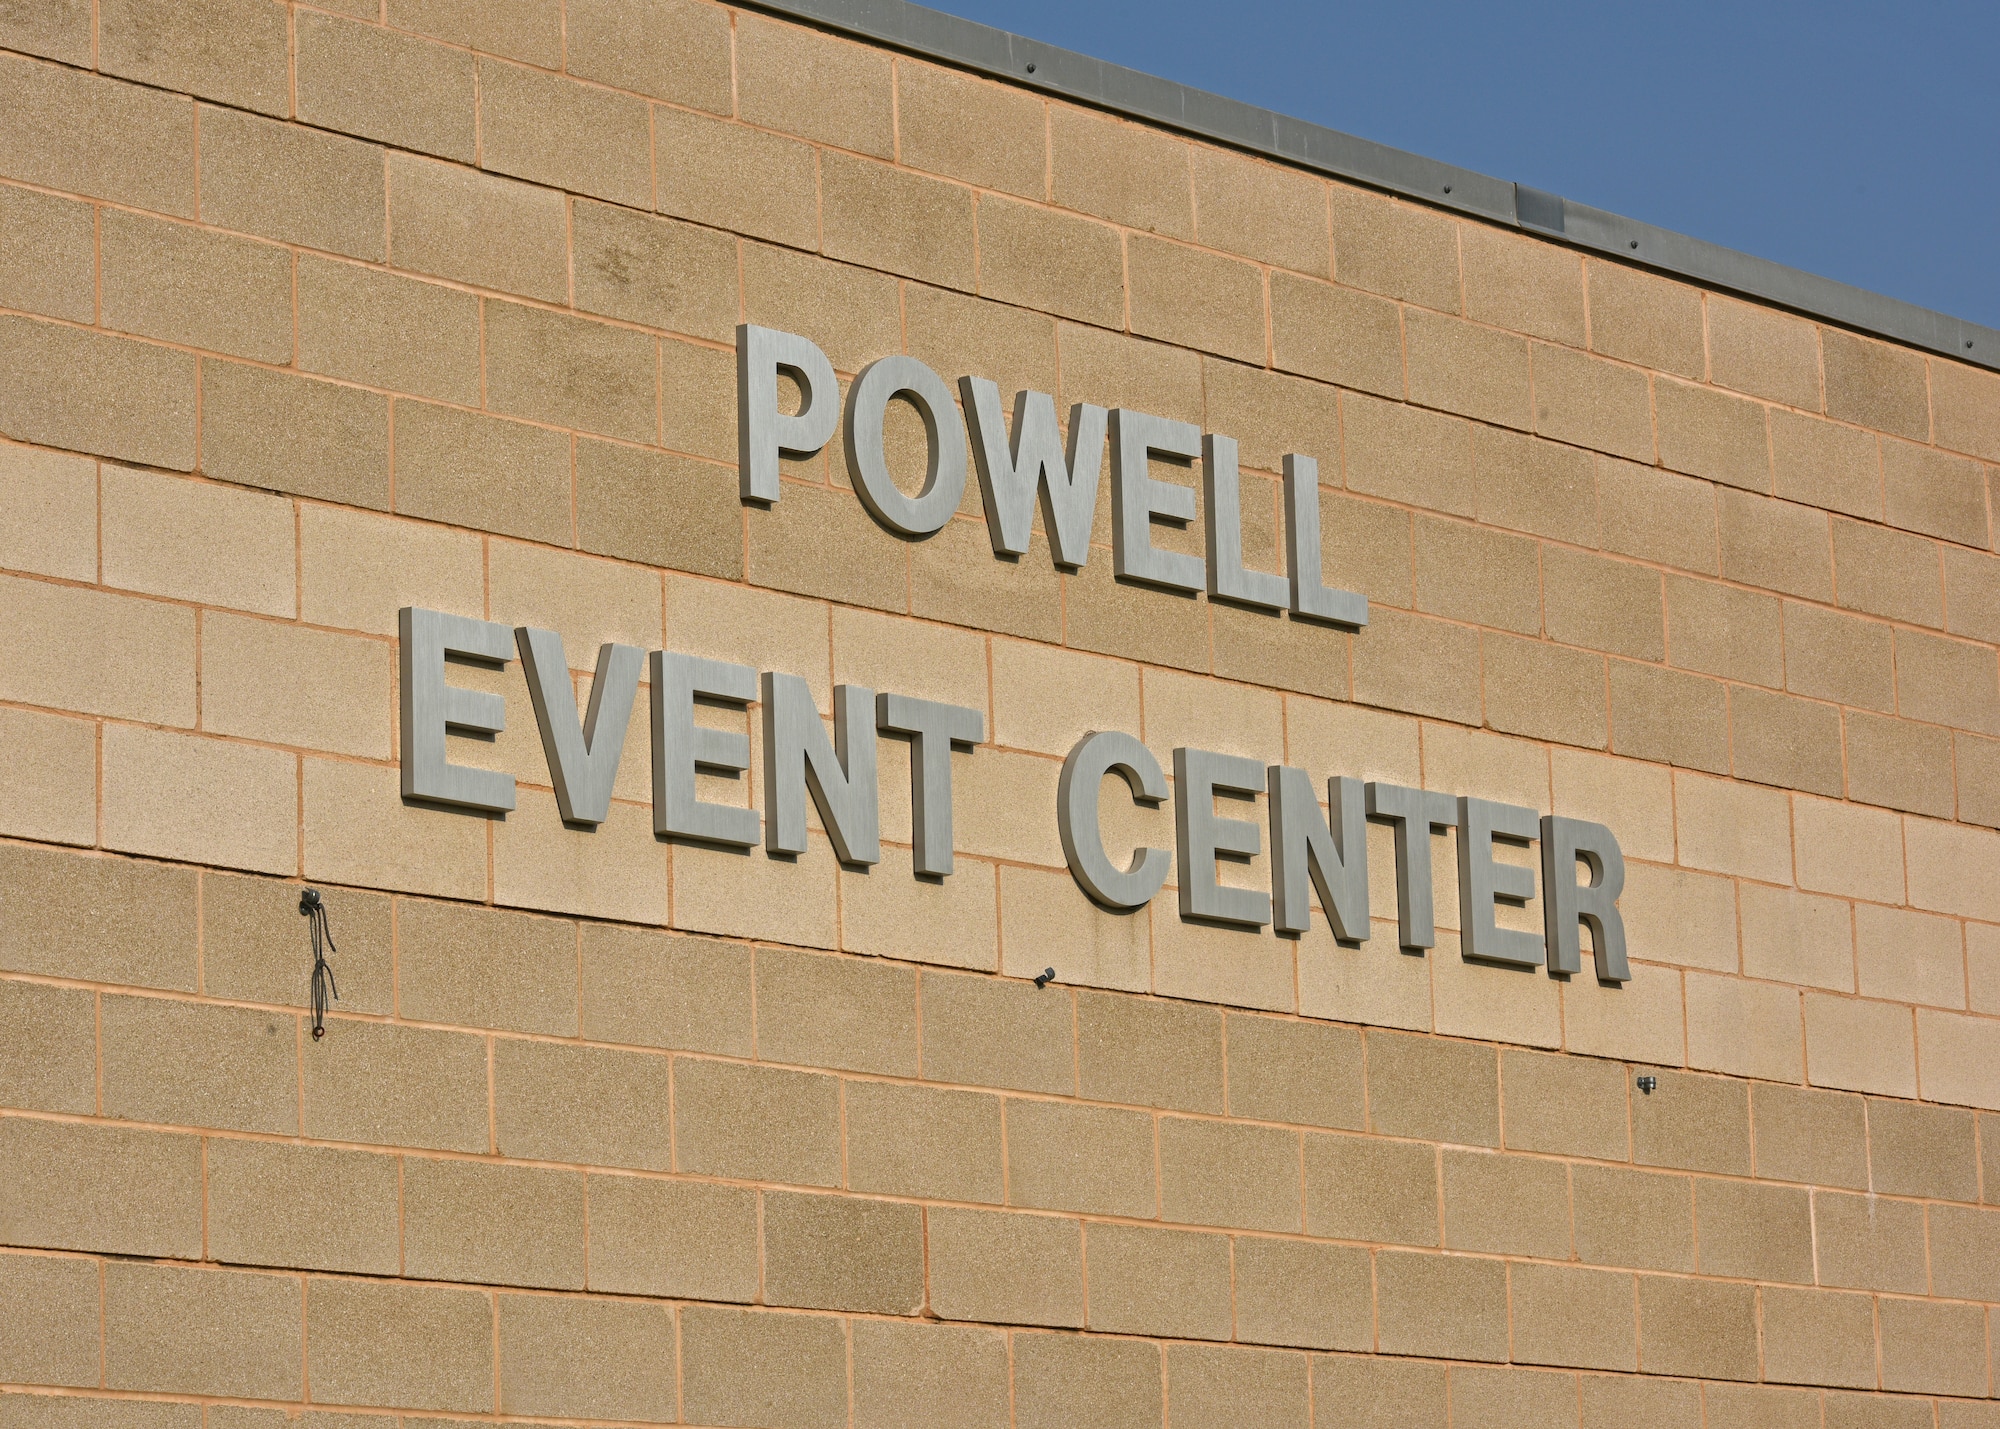 The newly renamed Powell Event Center during the dedication ceremony on Goodfellow Air Force Base, Sept. 10, 2021. The 17th Training Wing held the ceremony to officially celebrate the renaming of the event center in honor of Retired Col. Charles Powell and his wife. (U.S. Air Force photo by Senior Airman Ashley Thrash)